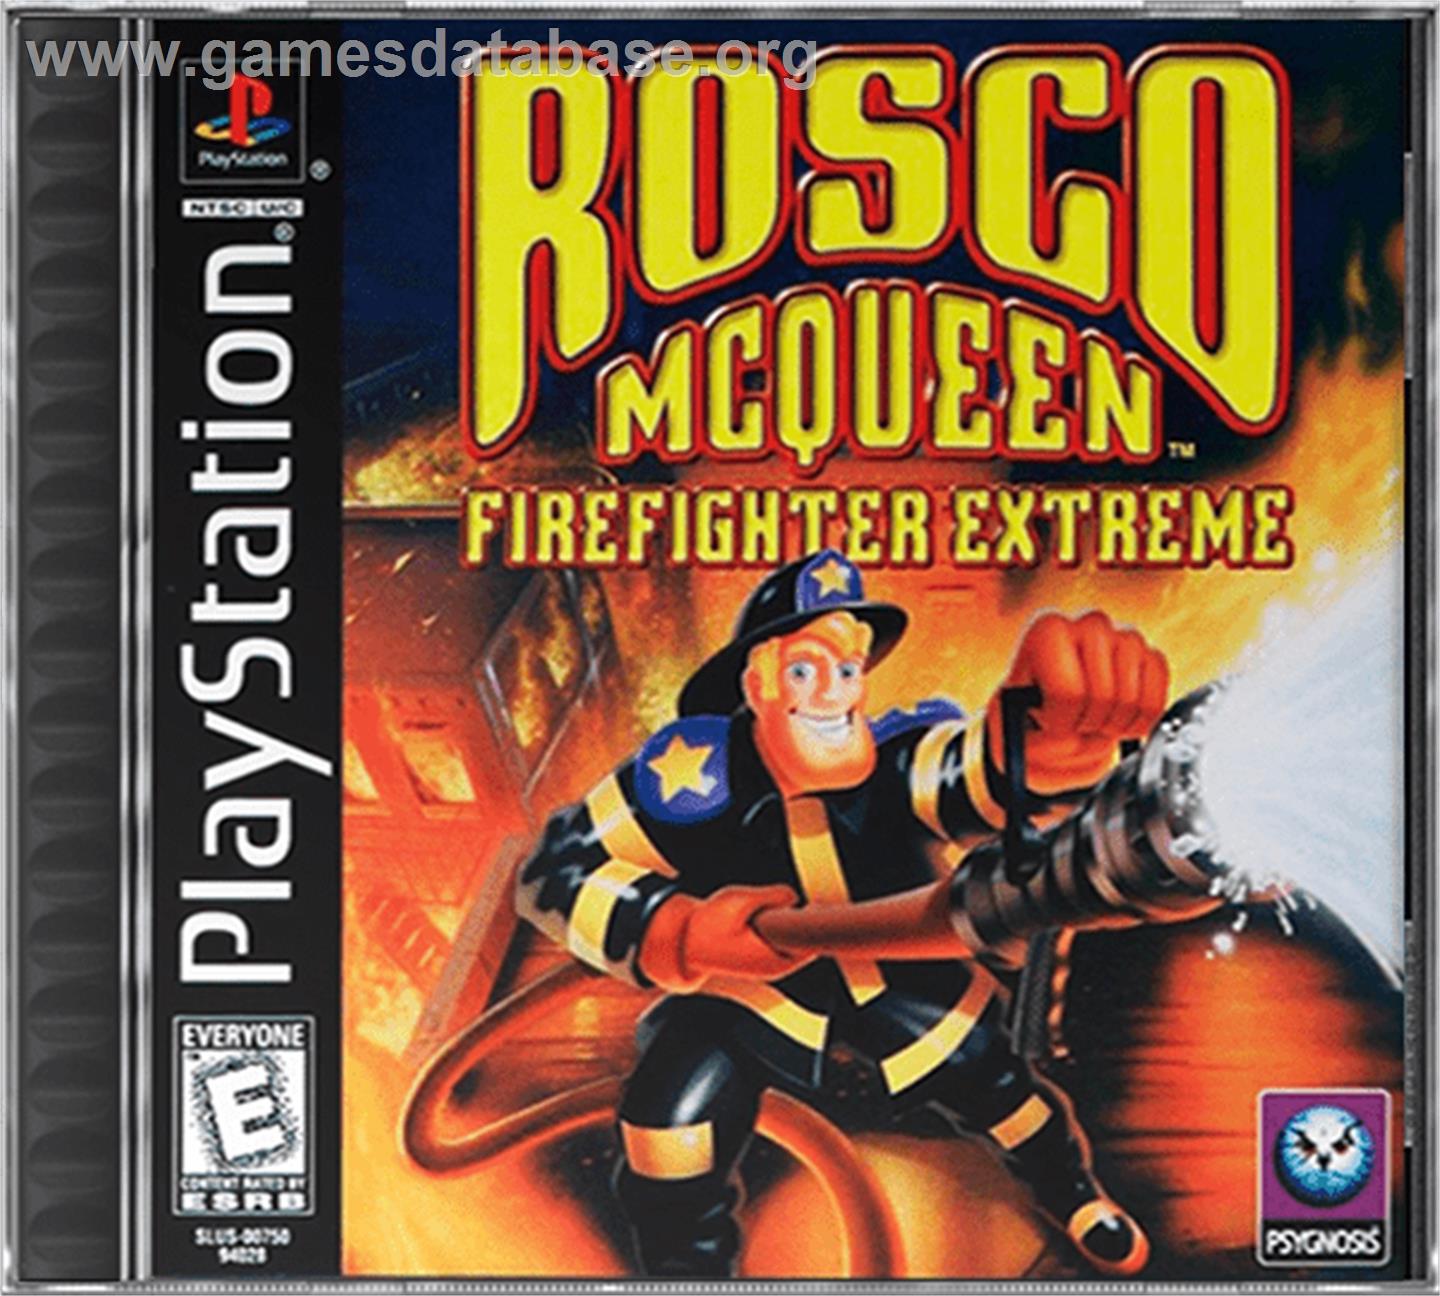 Rosco McQueen Firefighter Extreme - Sony Playstation - Artwork - Box